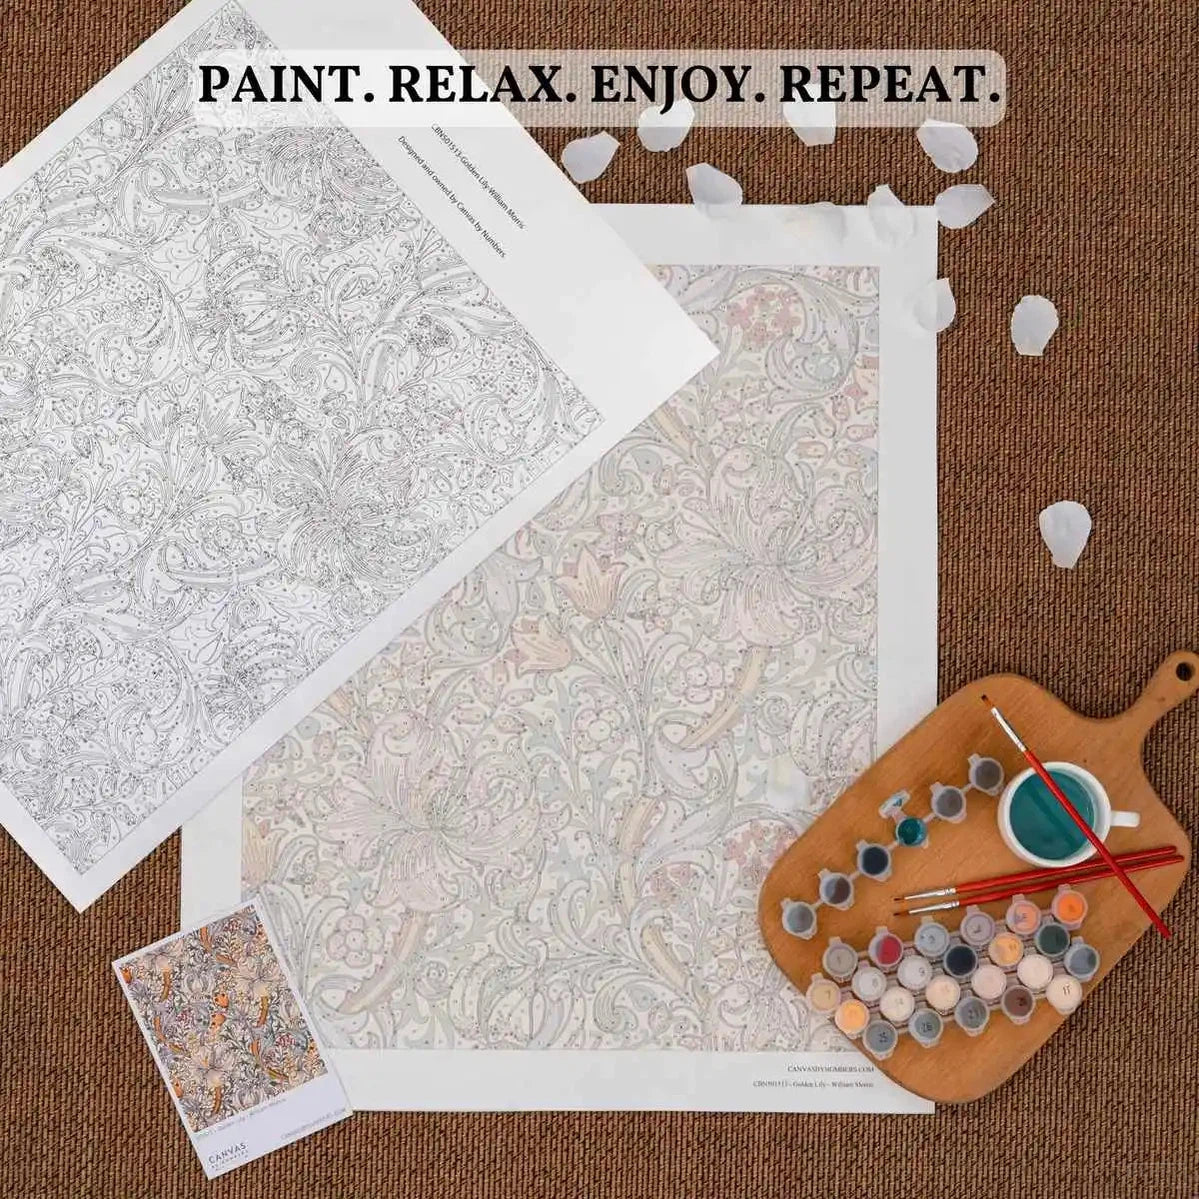 Warm Breath of Summer - Paint by Numbers-A small white house covered by flowers. Enjoy the Mediterranean beauty with our exclusive painting kits! Licensed artwork made with the best materials.-Canvas by Numbers